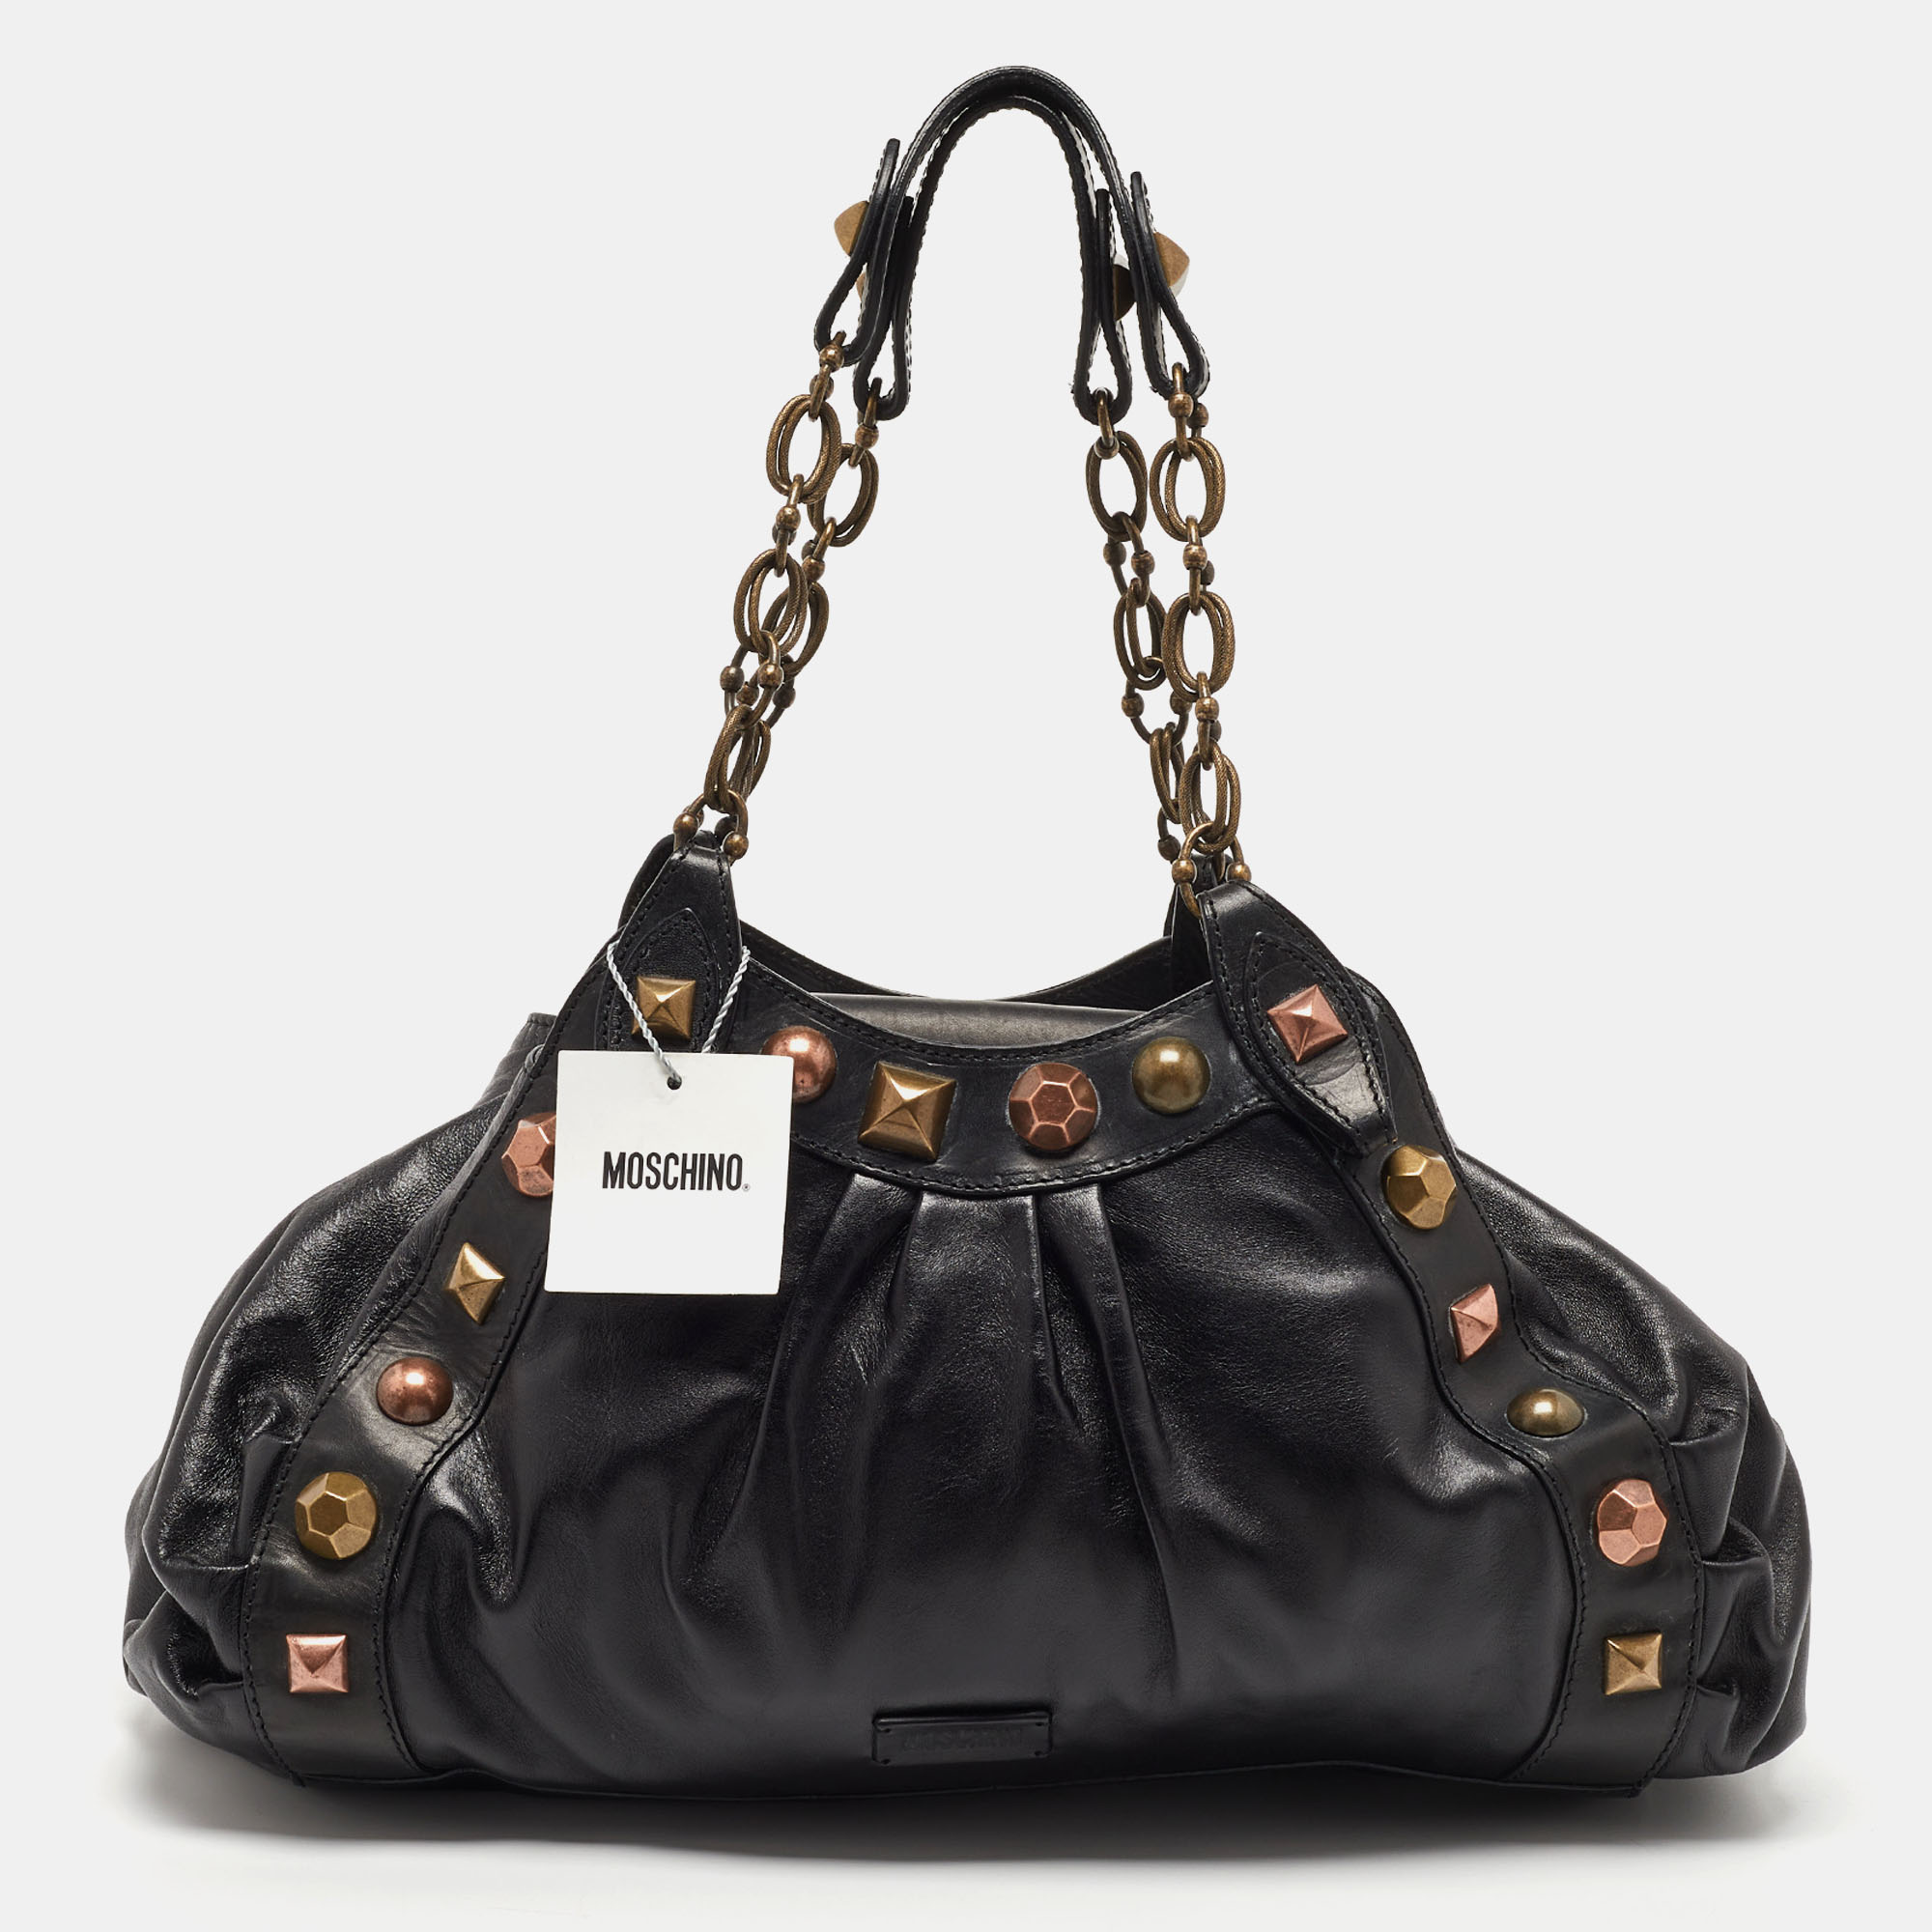 Pre-owned Moschino Black Leather Embellished Chain Link Satchel